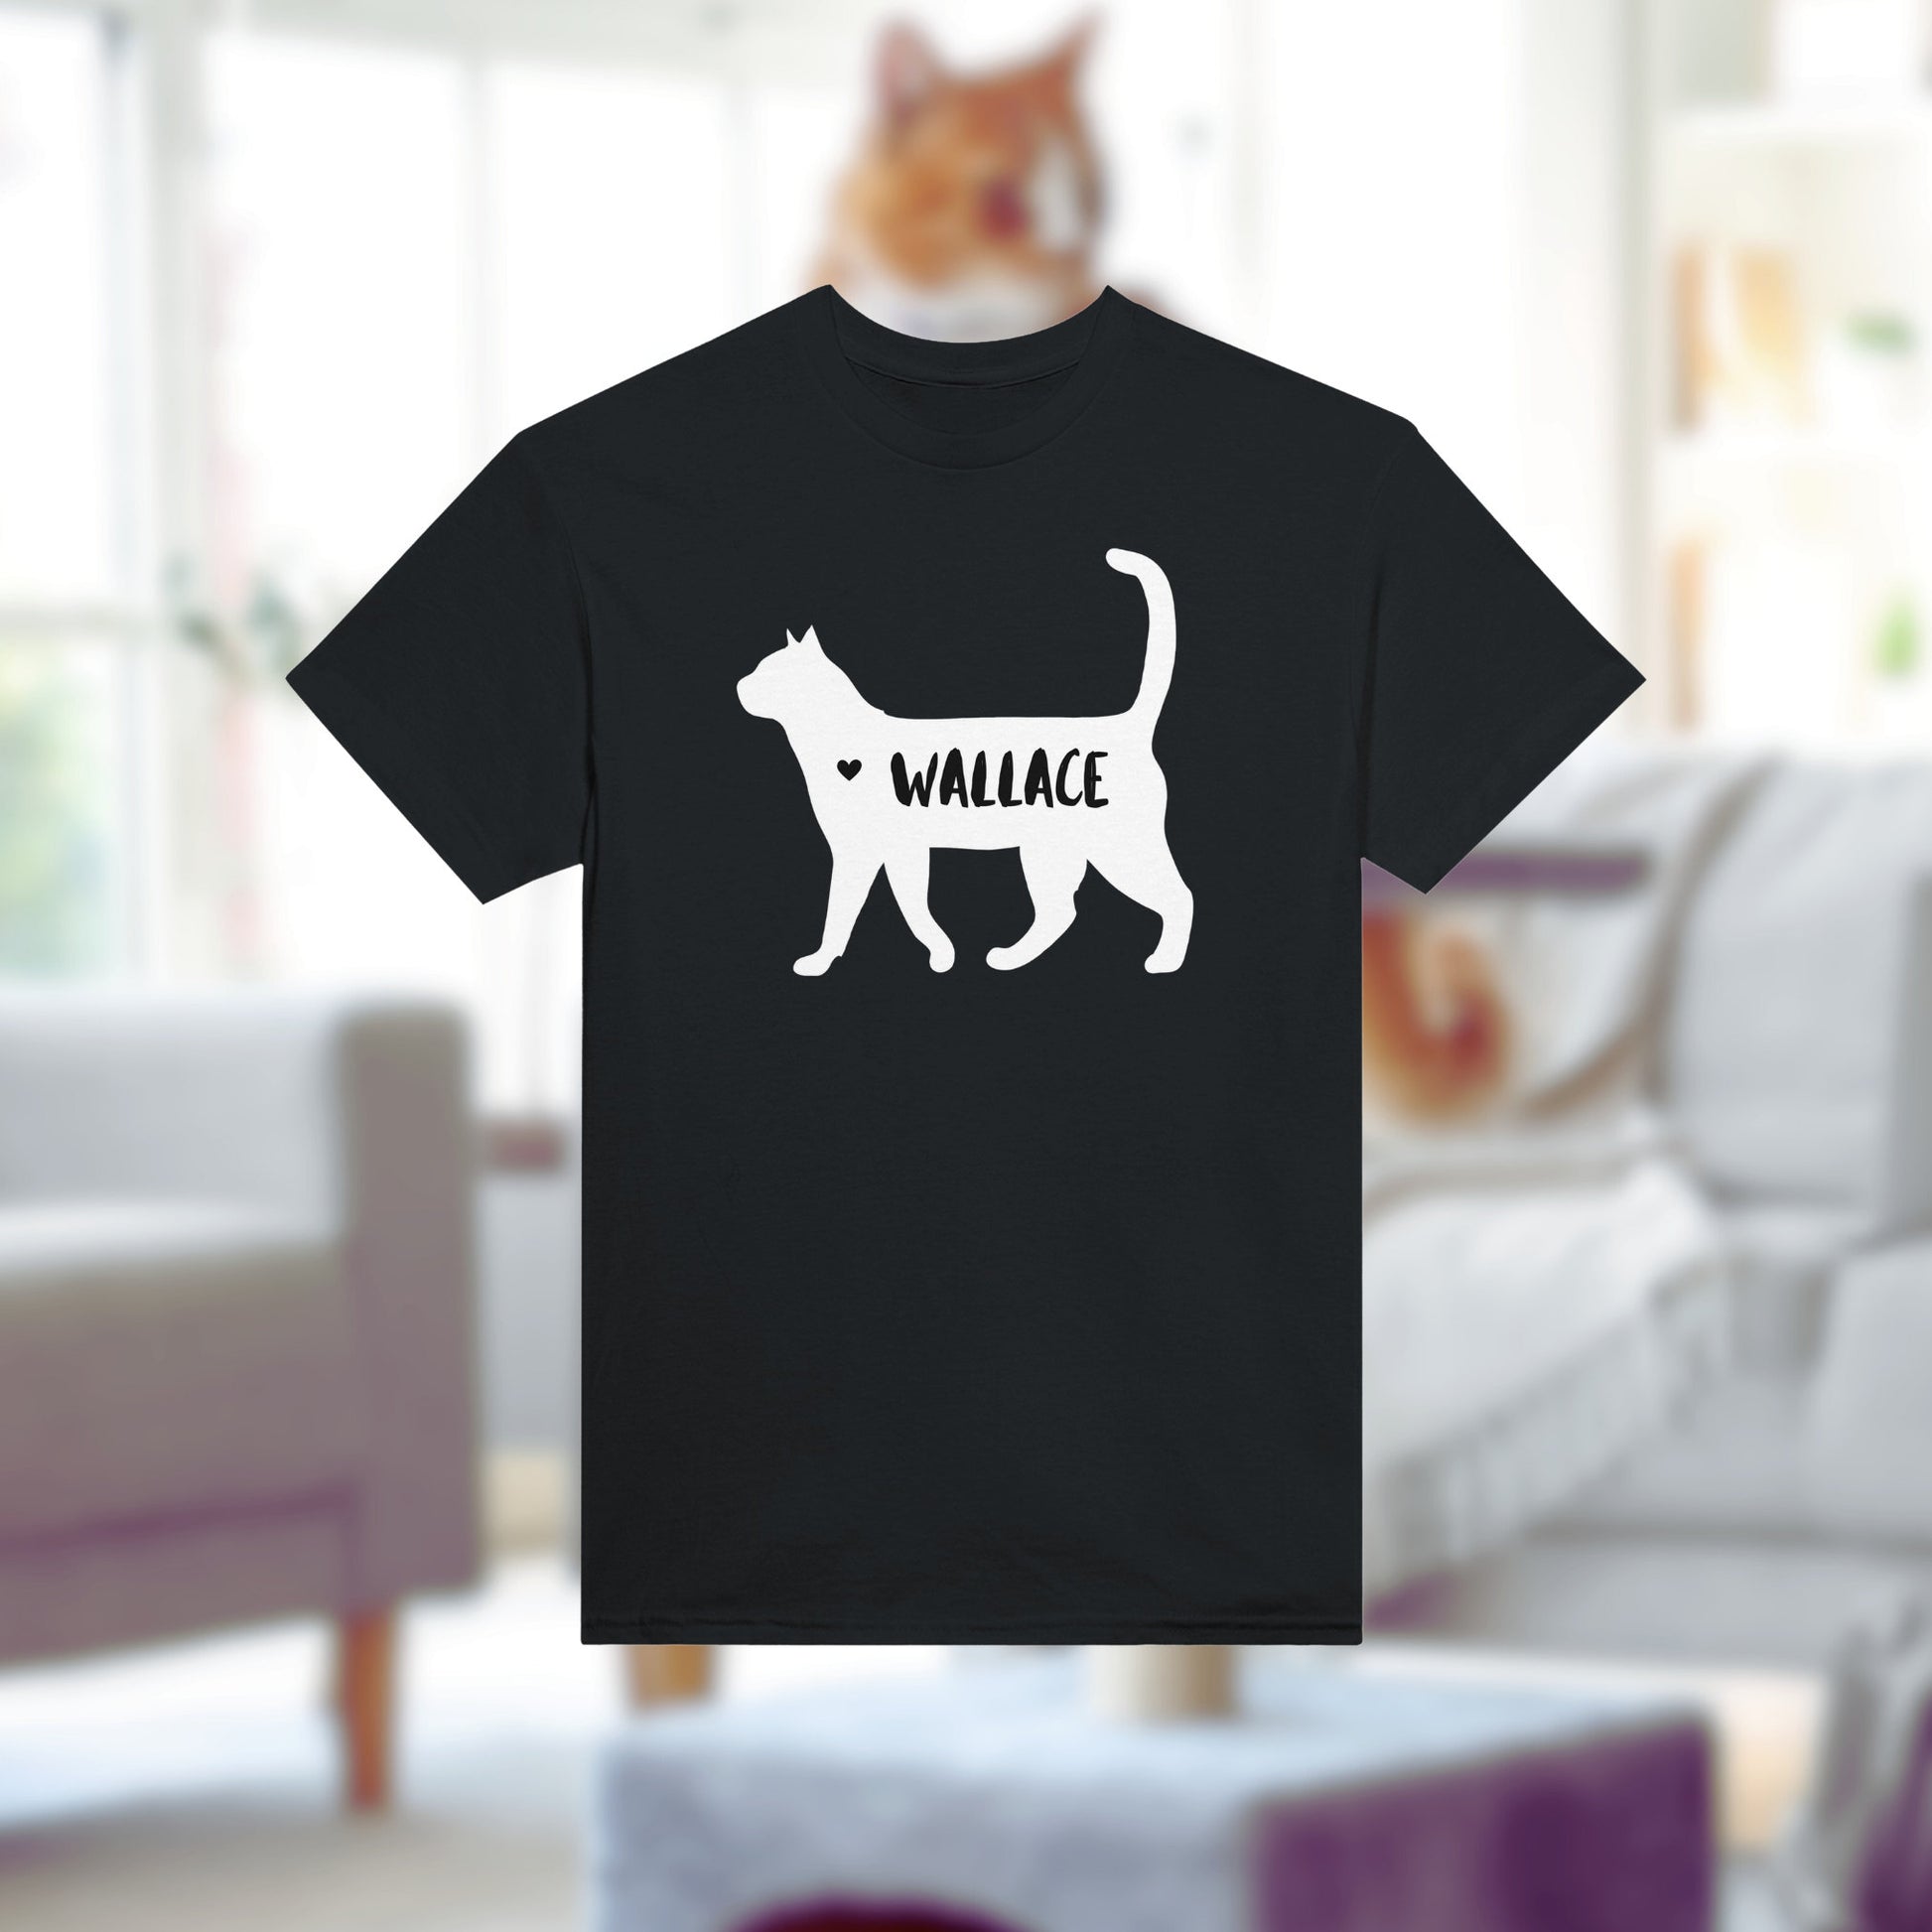 Personalized Cat Silhouette T-Shirt - Customize with Your Cat's Name! , Cat Silhouette, Cat Obsessed, Crazy Cat Lady